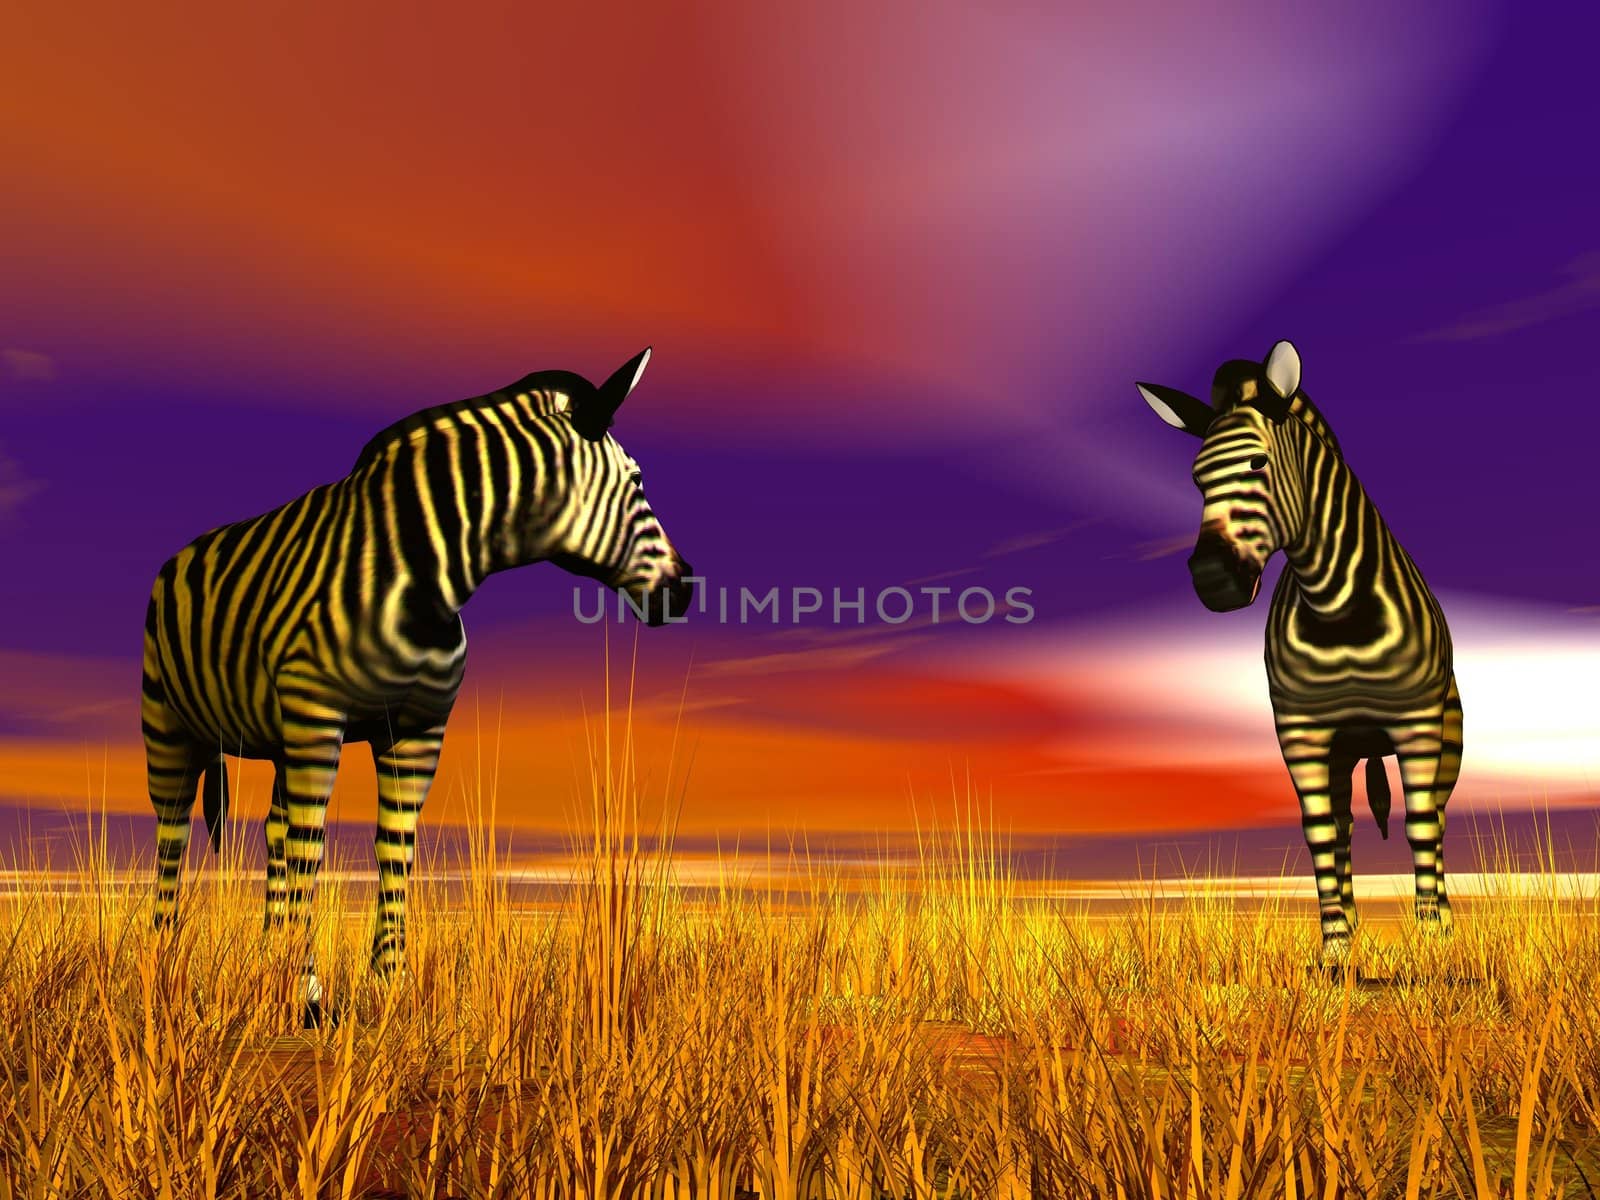 Two zebras looking at each other in the savannah by colorful sunset